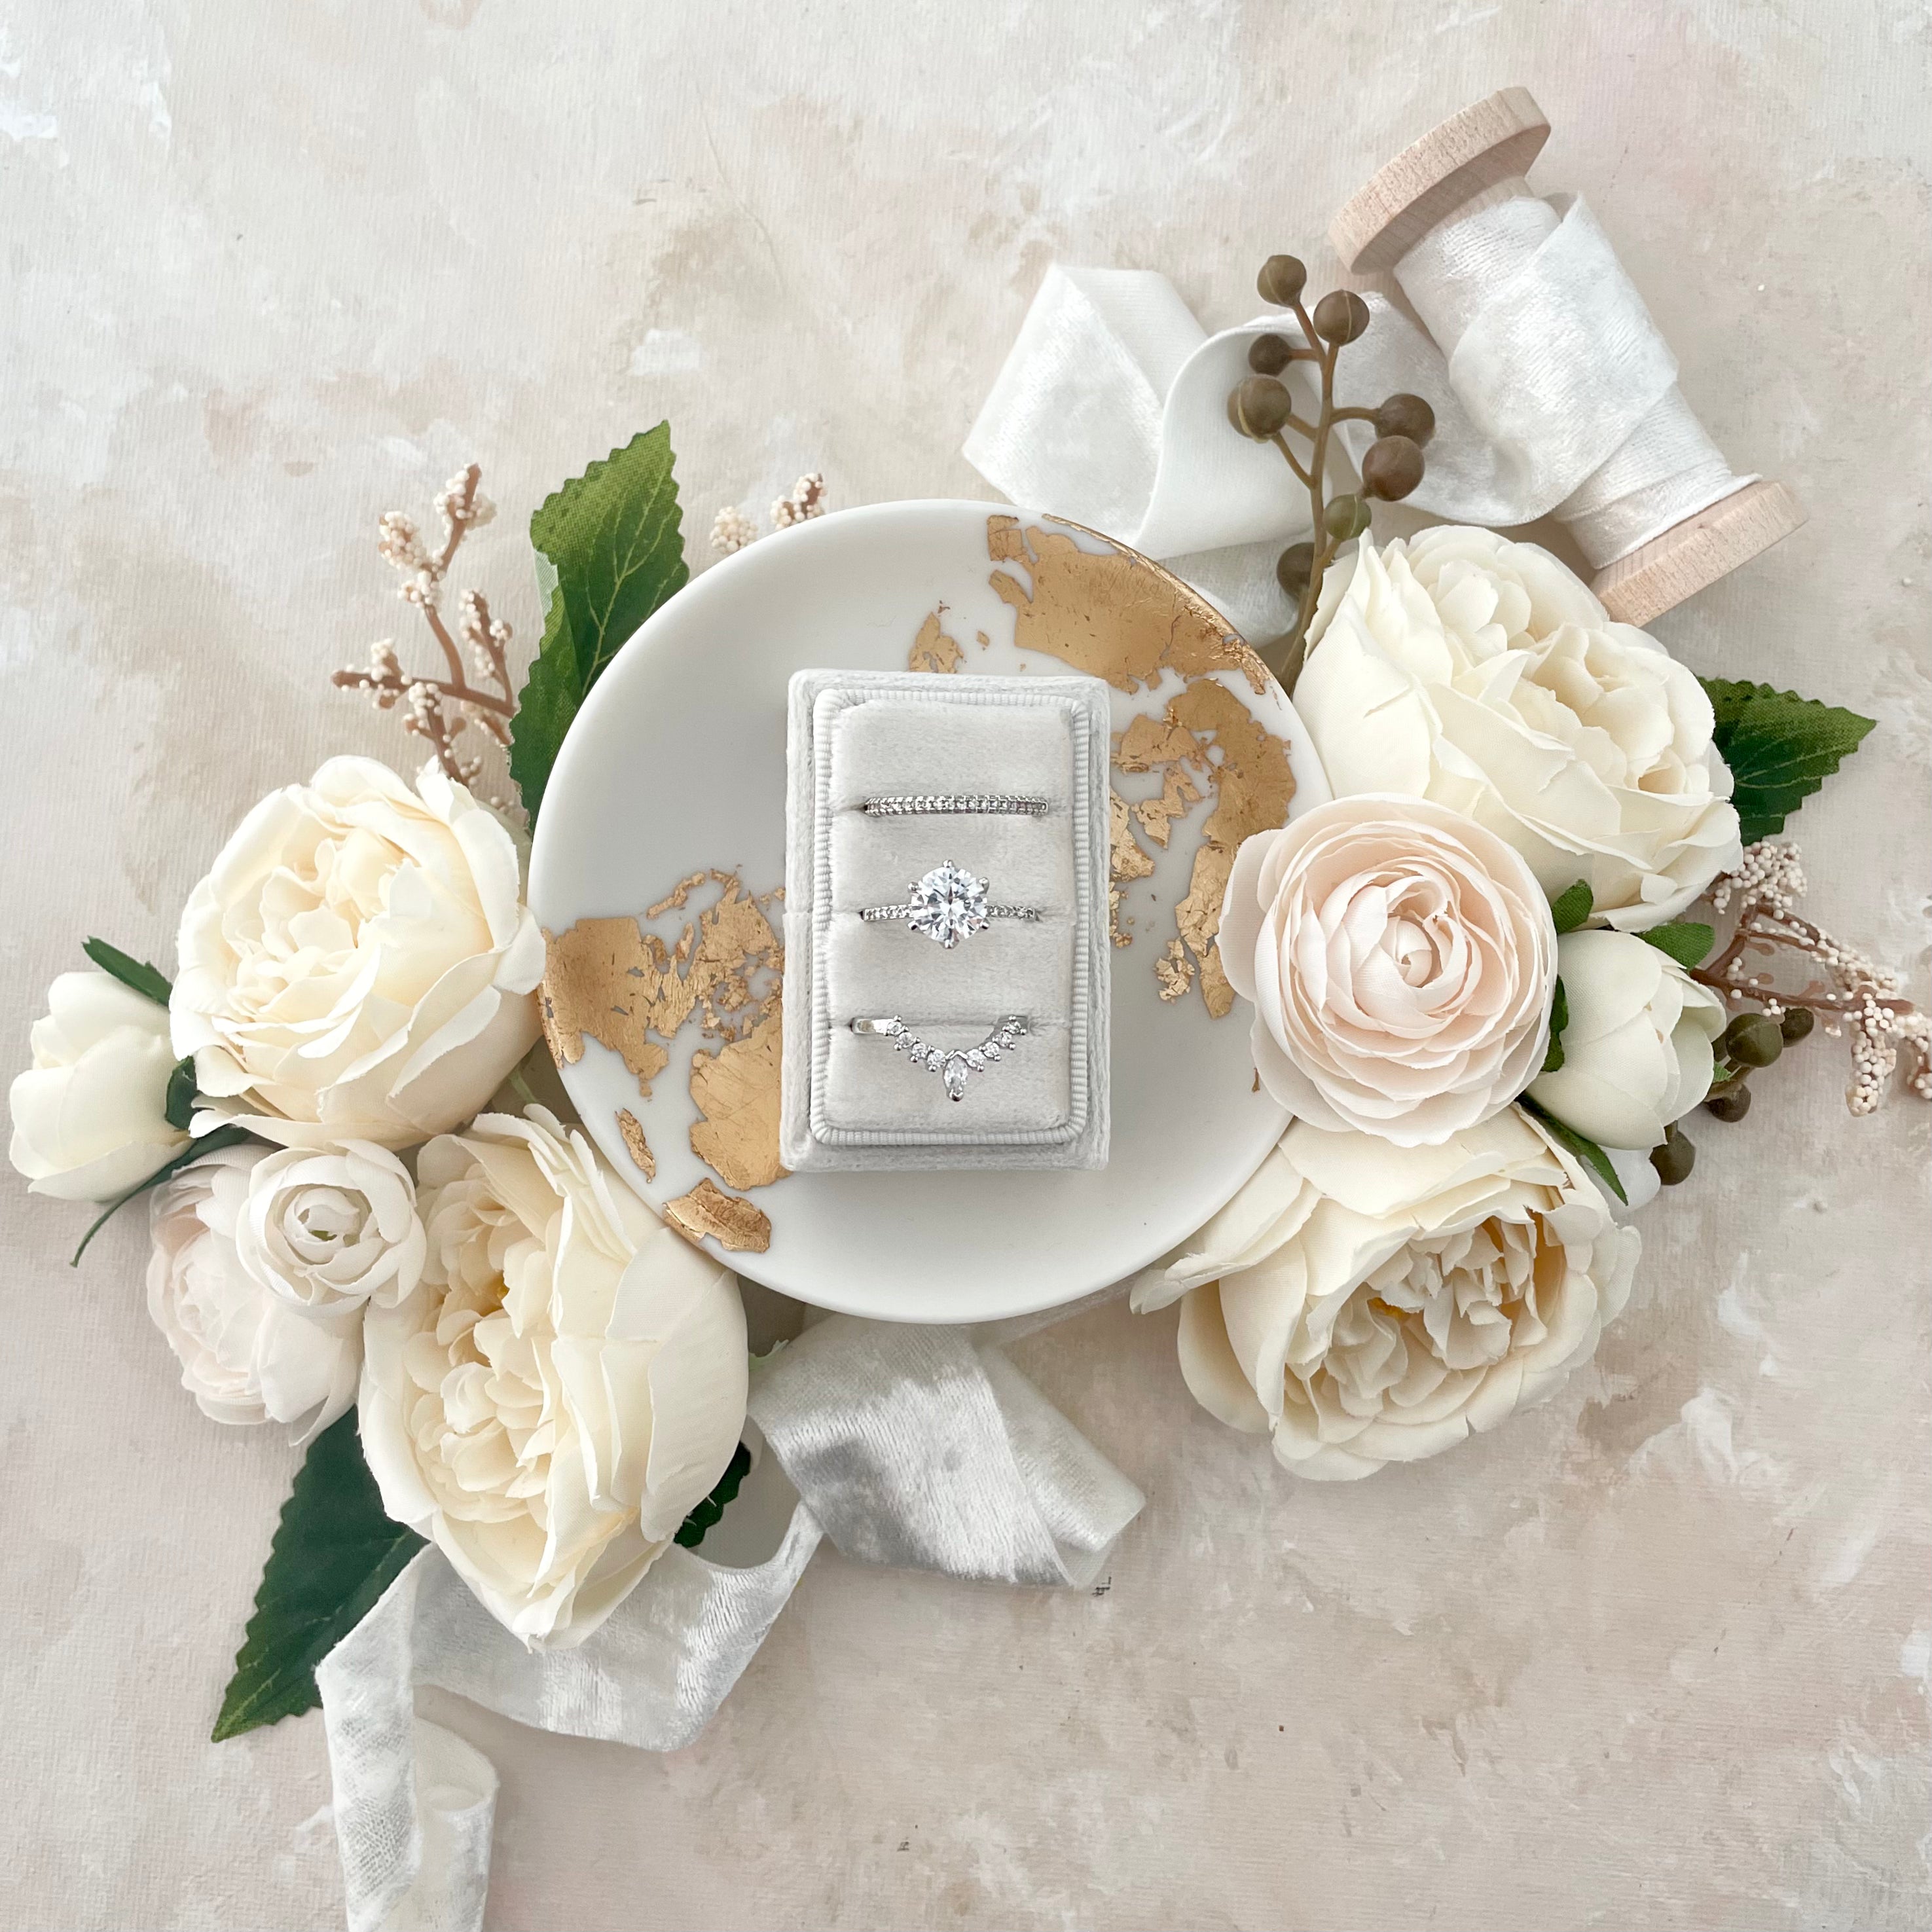 White triple slot ring box in white dish with white velvet ribbon  -  Wedding Flat lay props from Champagne & GRIT